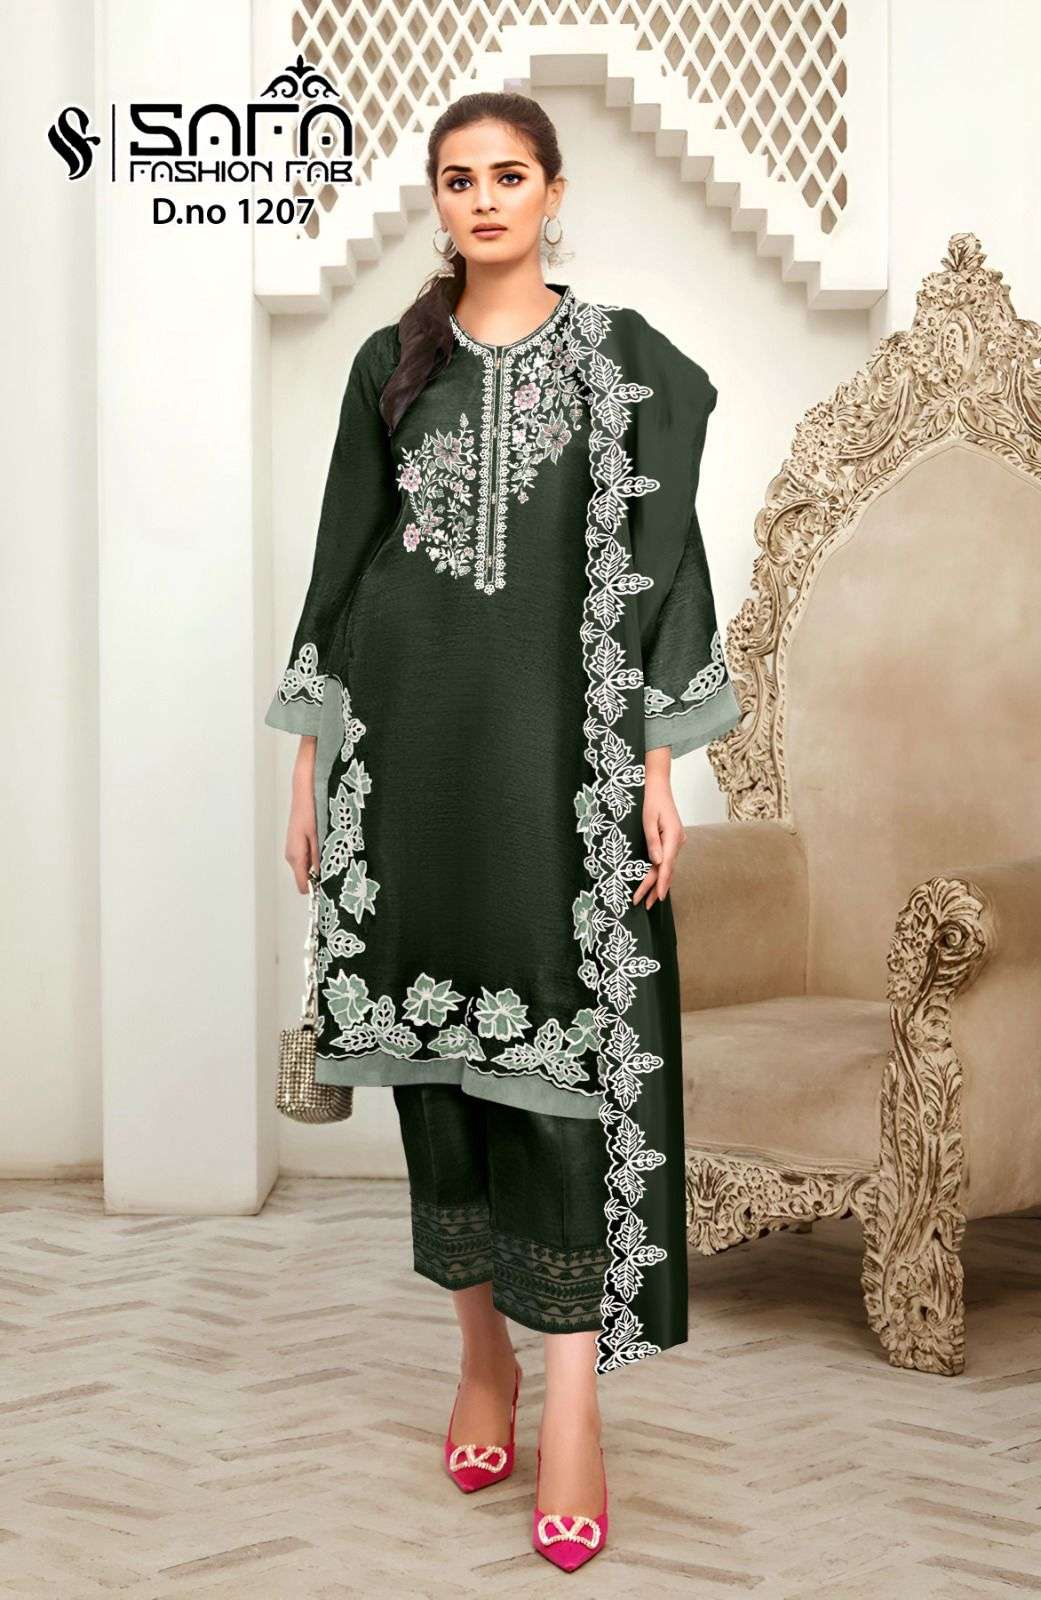 Embroidered Glossy Saira Salwar Suit, Unstitched at Rs 1350 in Surat